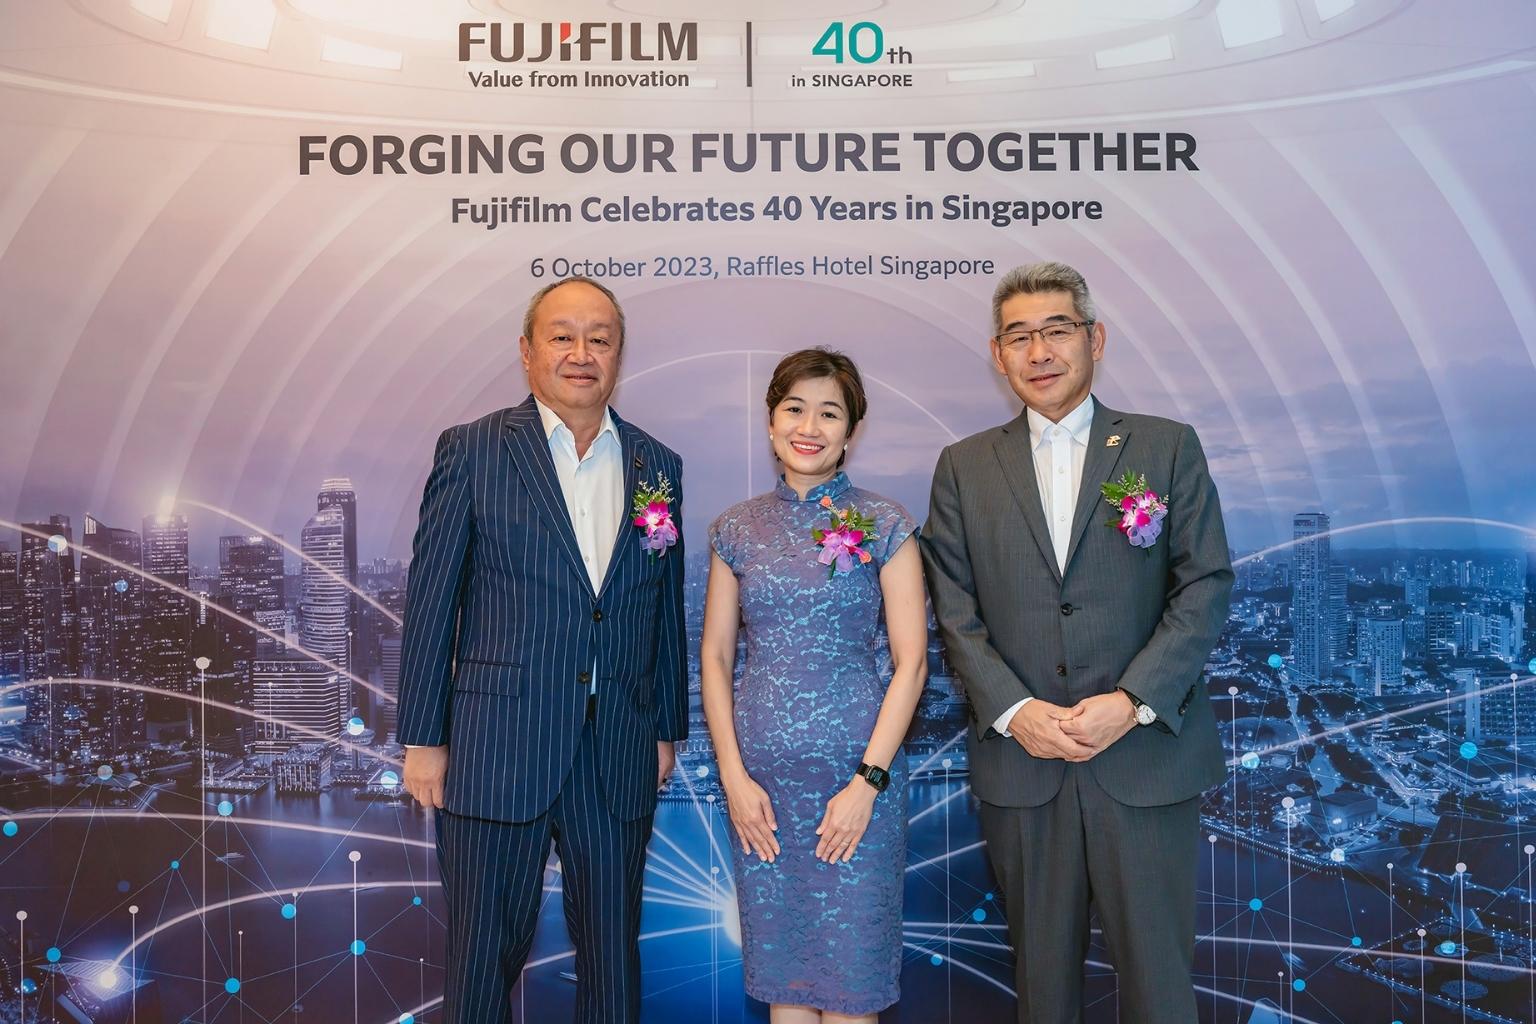 Mr. Teiichi Goto, President and CEO, Representative Director of FUJIFILM Holdings Corporation (left) with H.E. Ambassador Hiroshi Ishikawa, Ambassador of Japan to Singapore (right) and Ms. Jacqueline Poh, Managing Director of the Singapore Economic Development Board (center) at the 40th year event